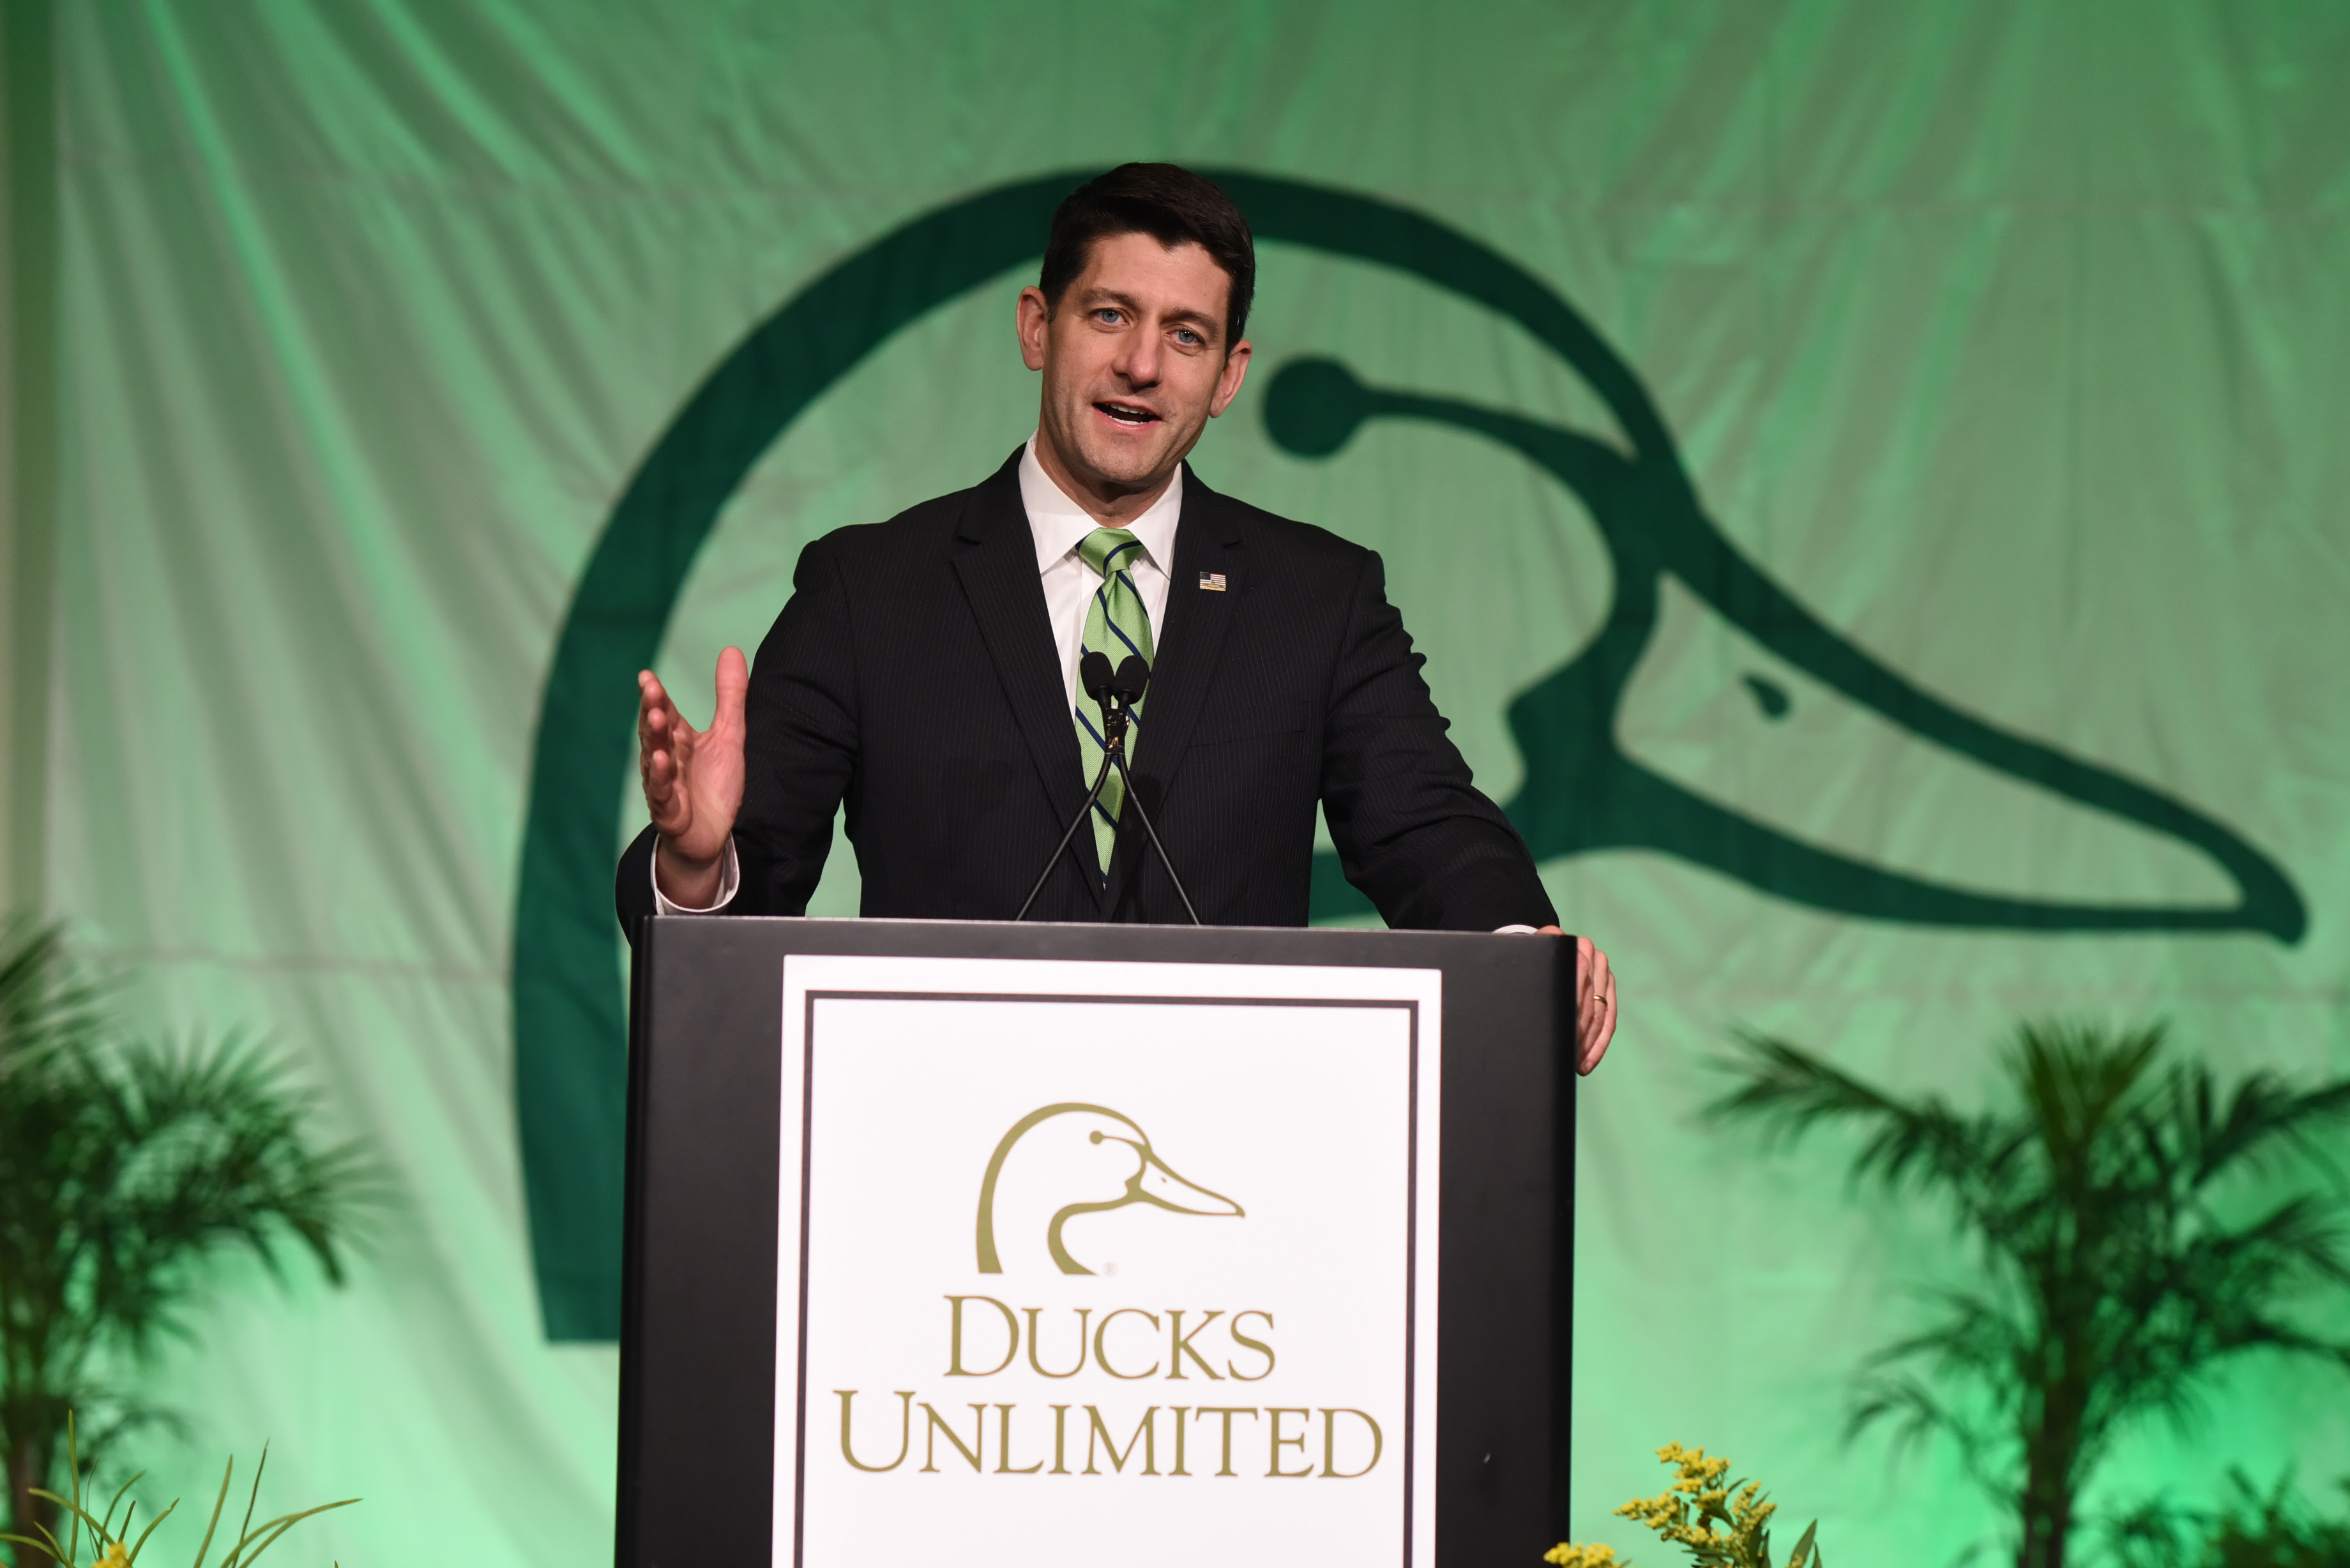 Ducks Unlimited Celebrates 80 Years of Conservation in DC